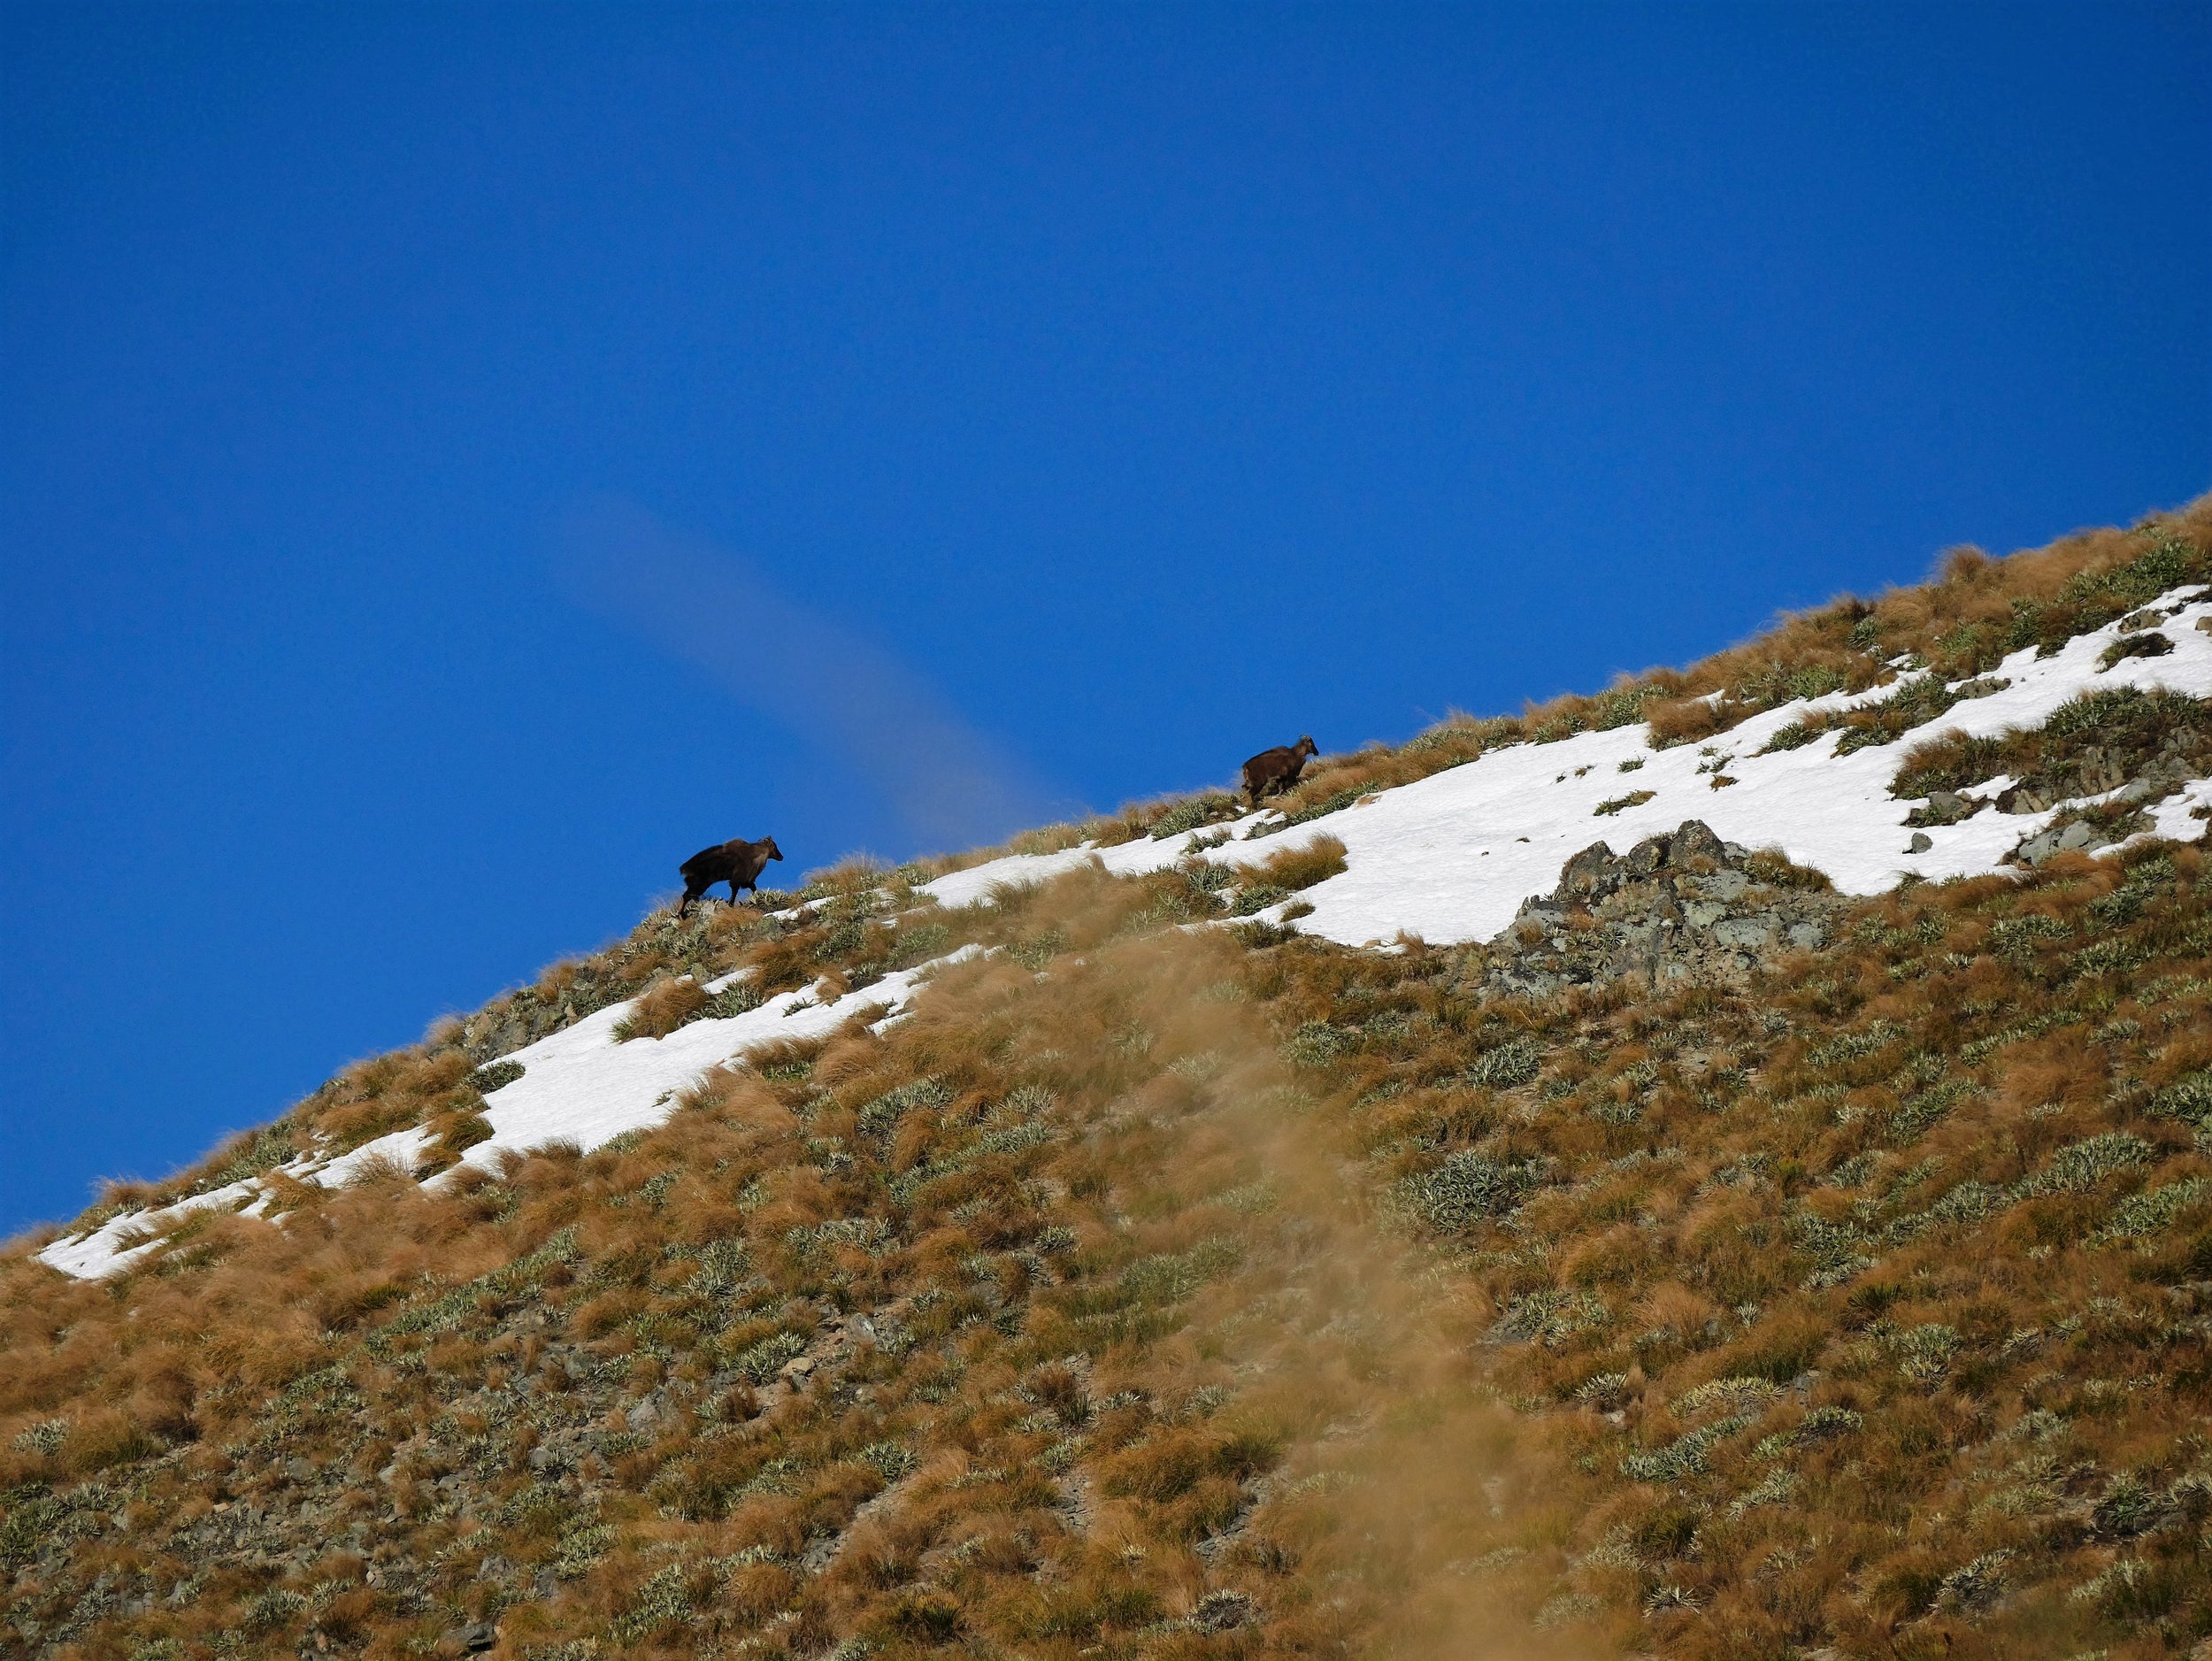  Rutting Bull Tahr following a nanny over the hill  